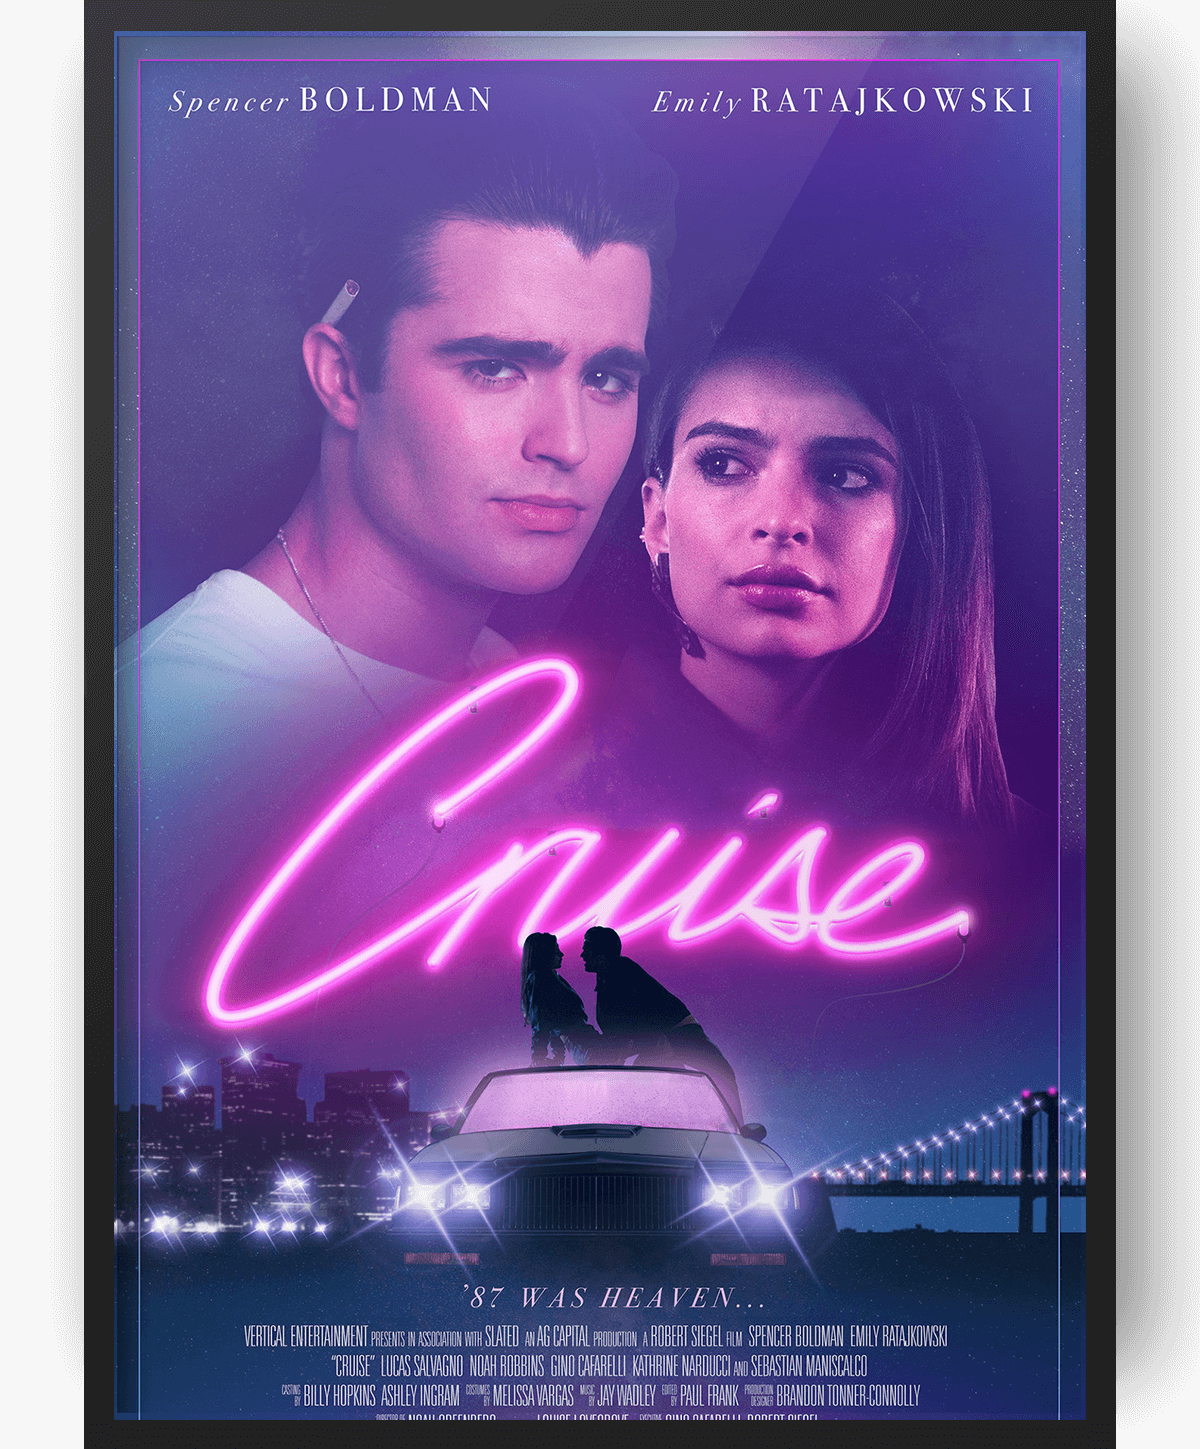 Image_Poster_Cruise.png